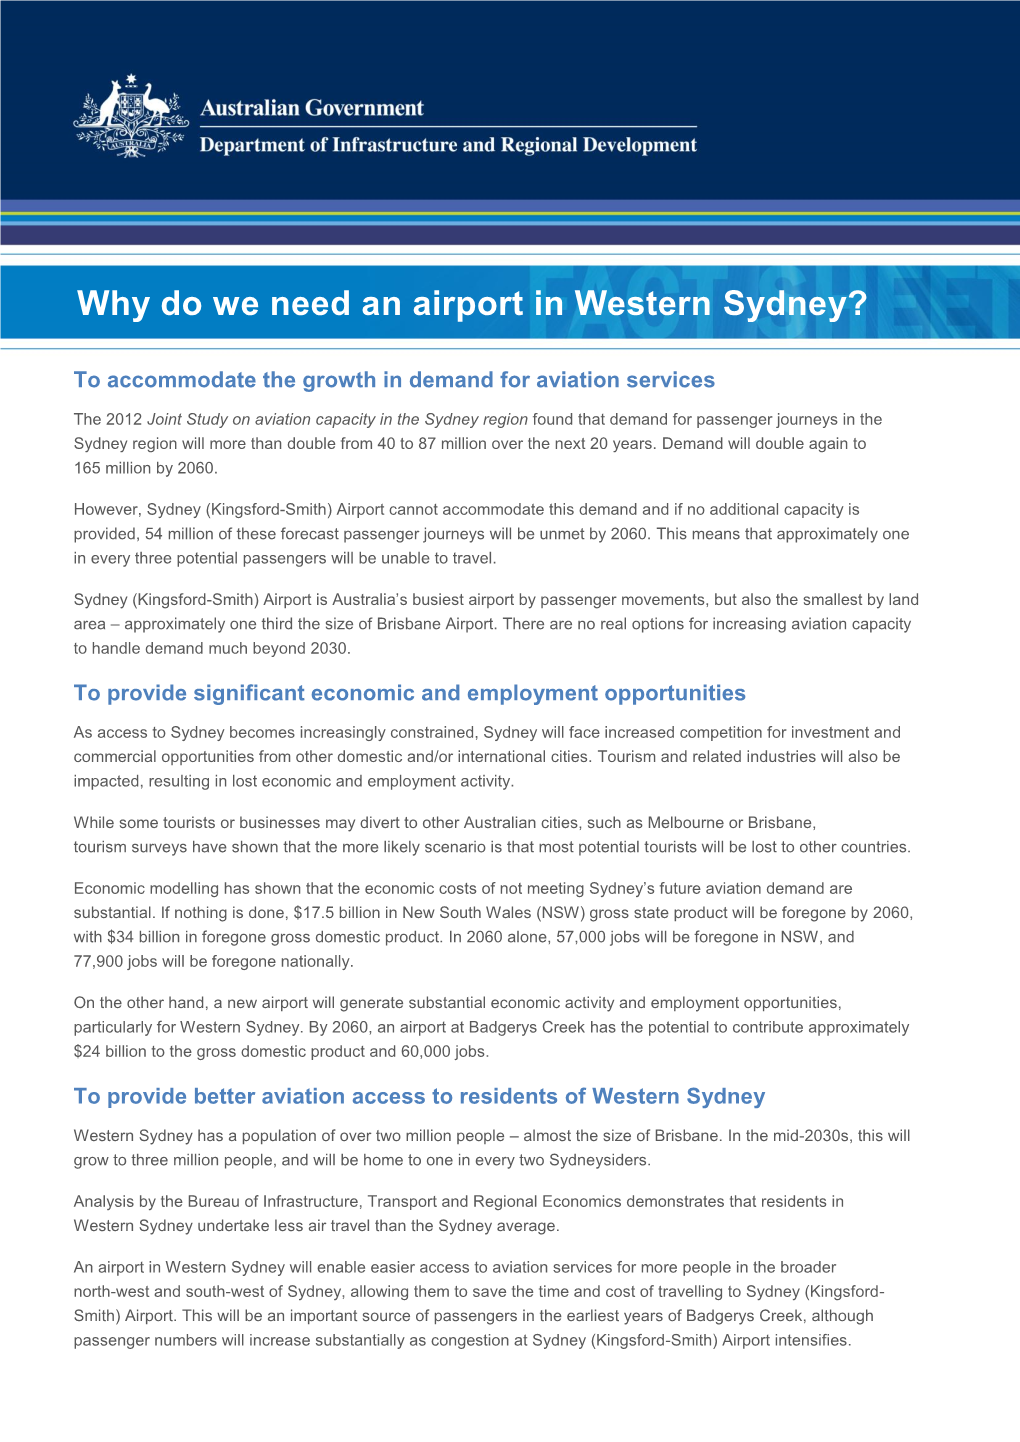 Why Do We Need an Airport in Western Sydney?